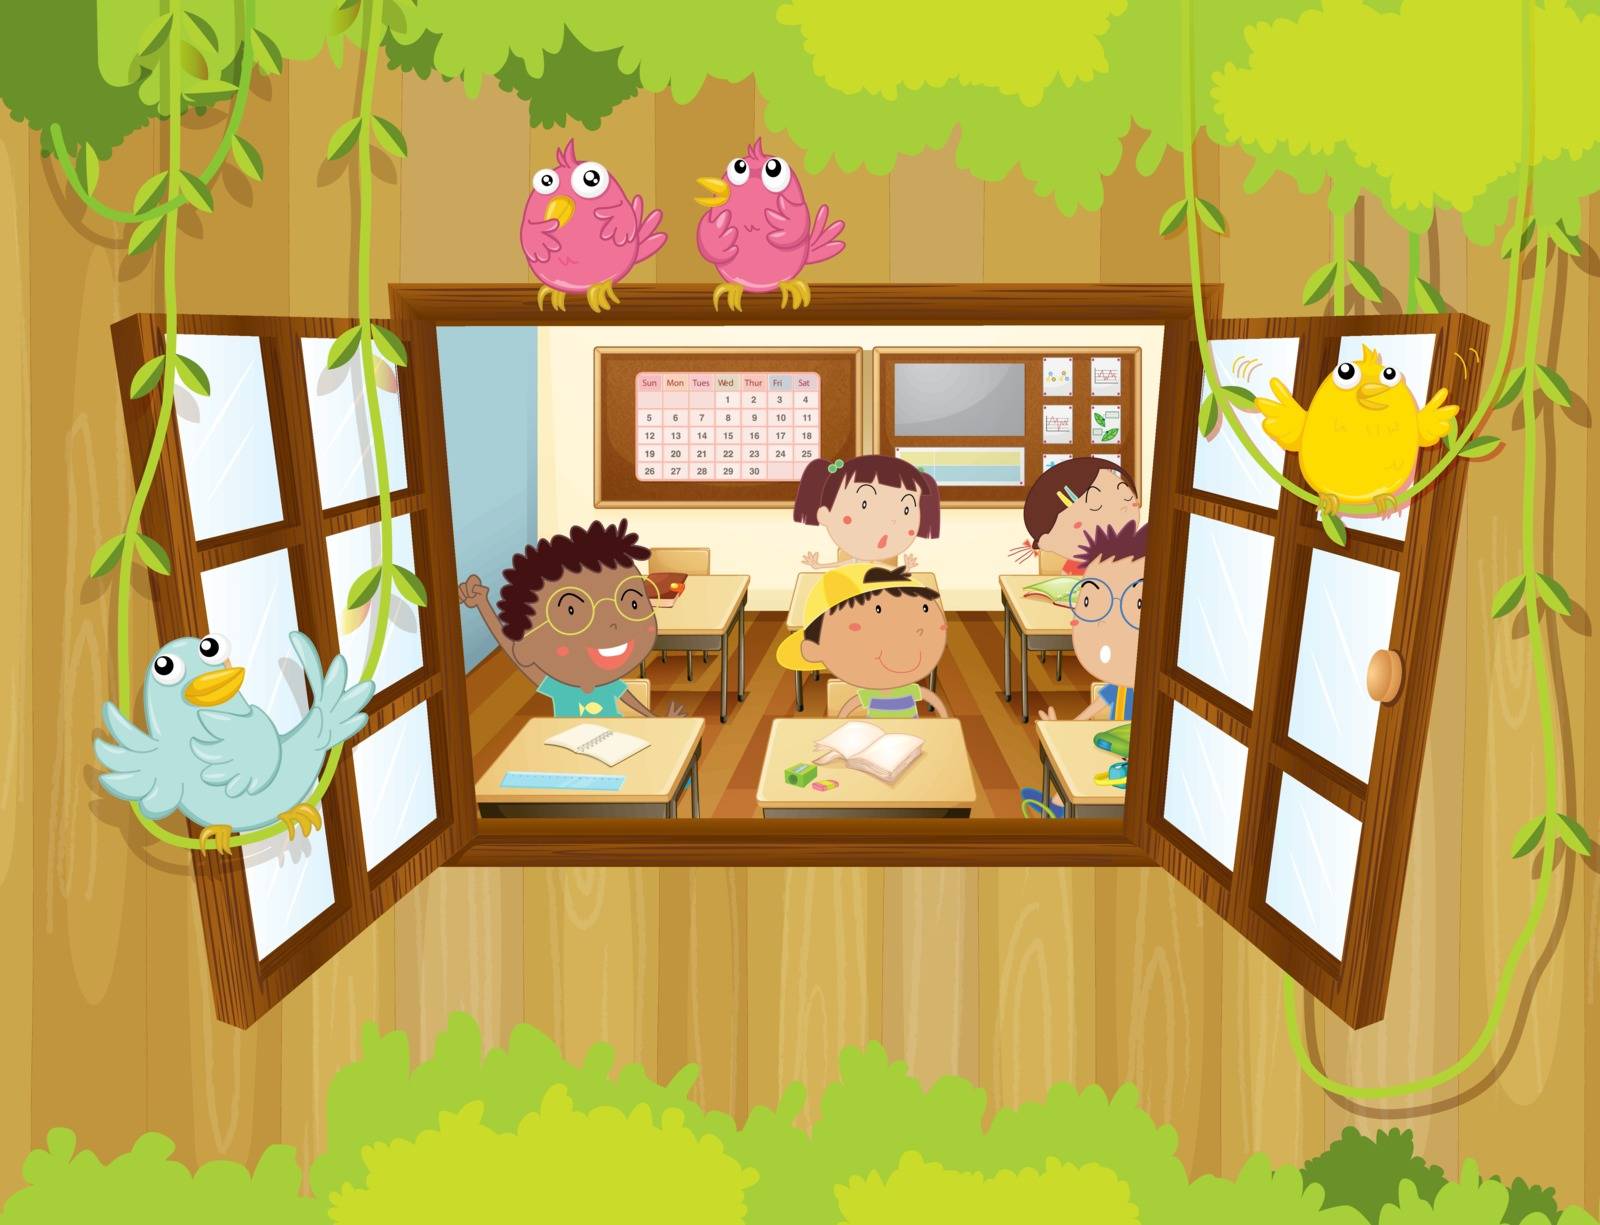 Illustration of the children at the school